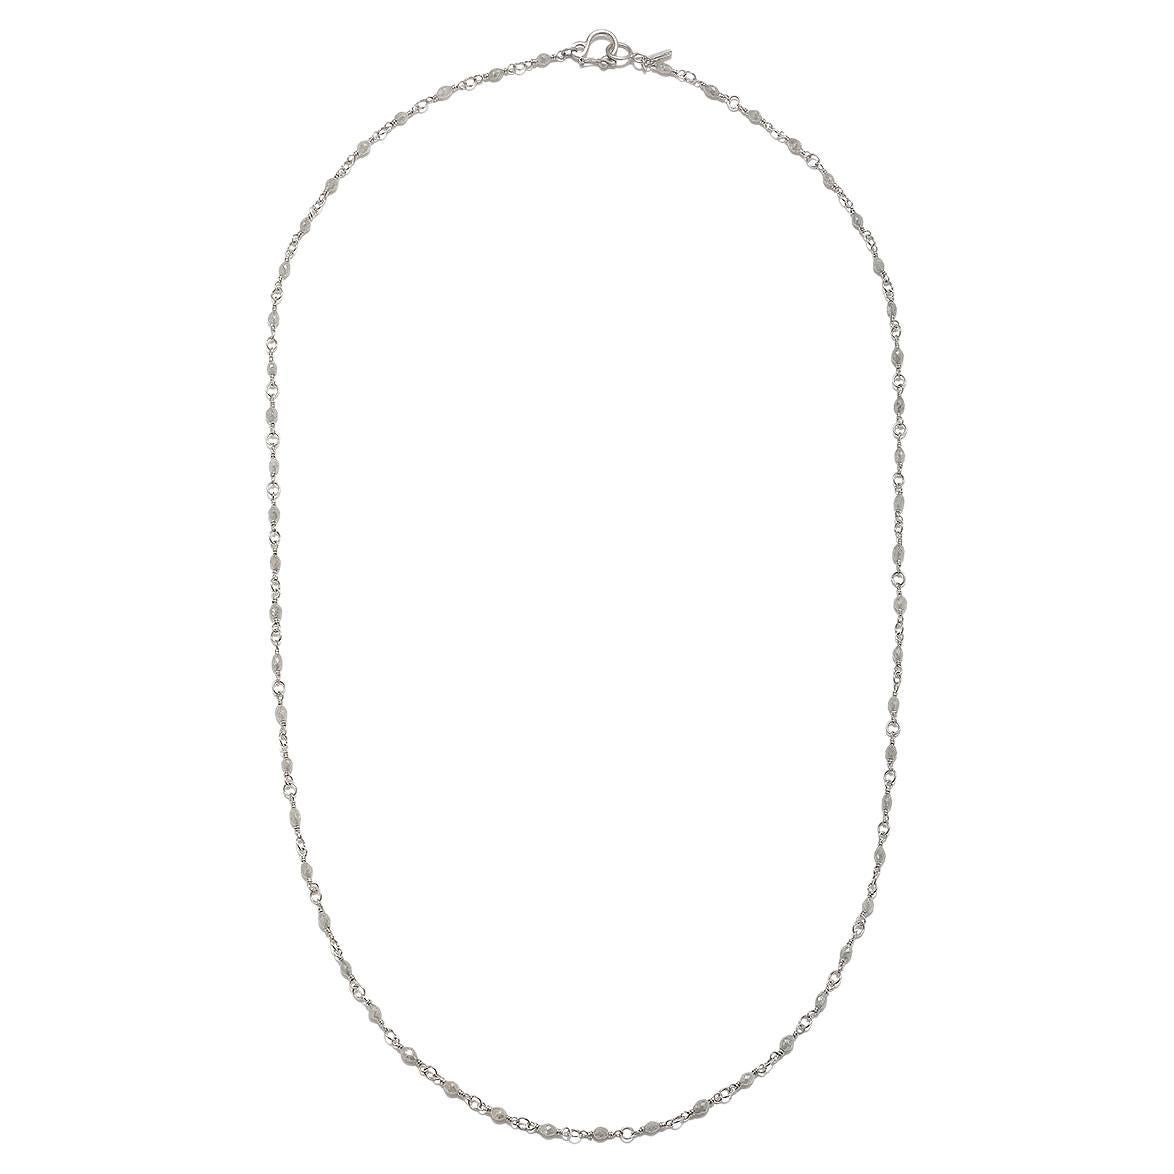 Faye Kim Platinum Handwrapped Bead Necklace - 25"  For Sale